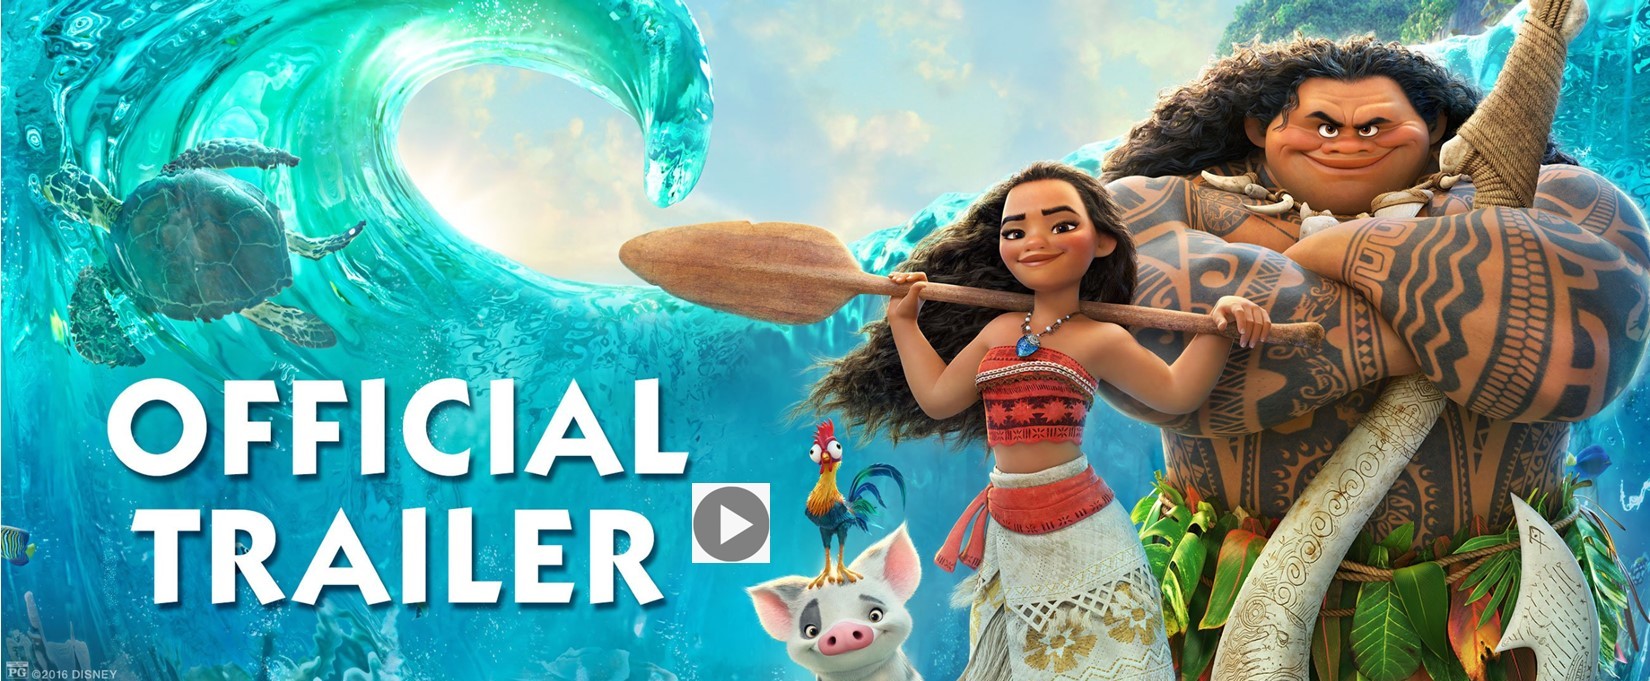 Movies in Park Moana Trailer image